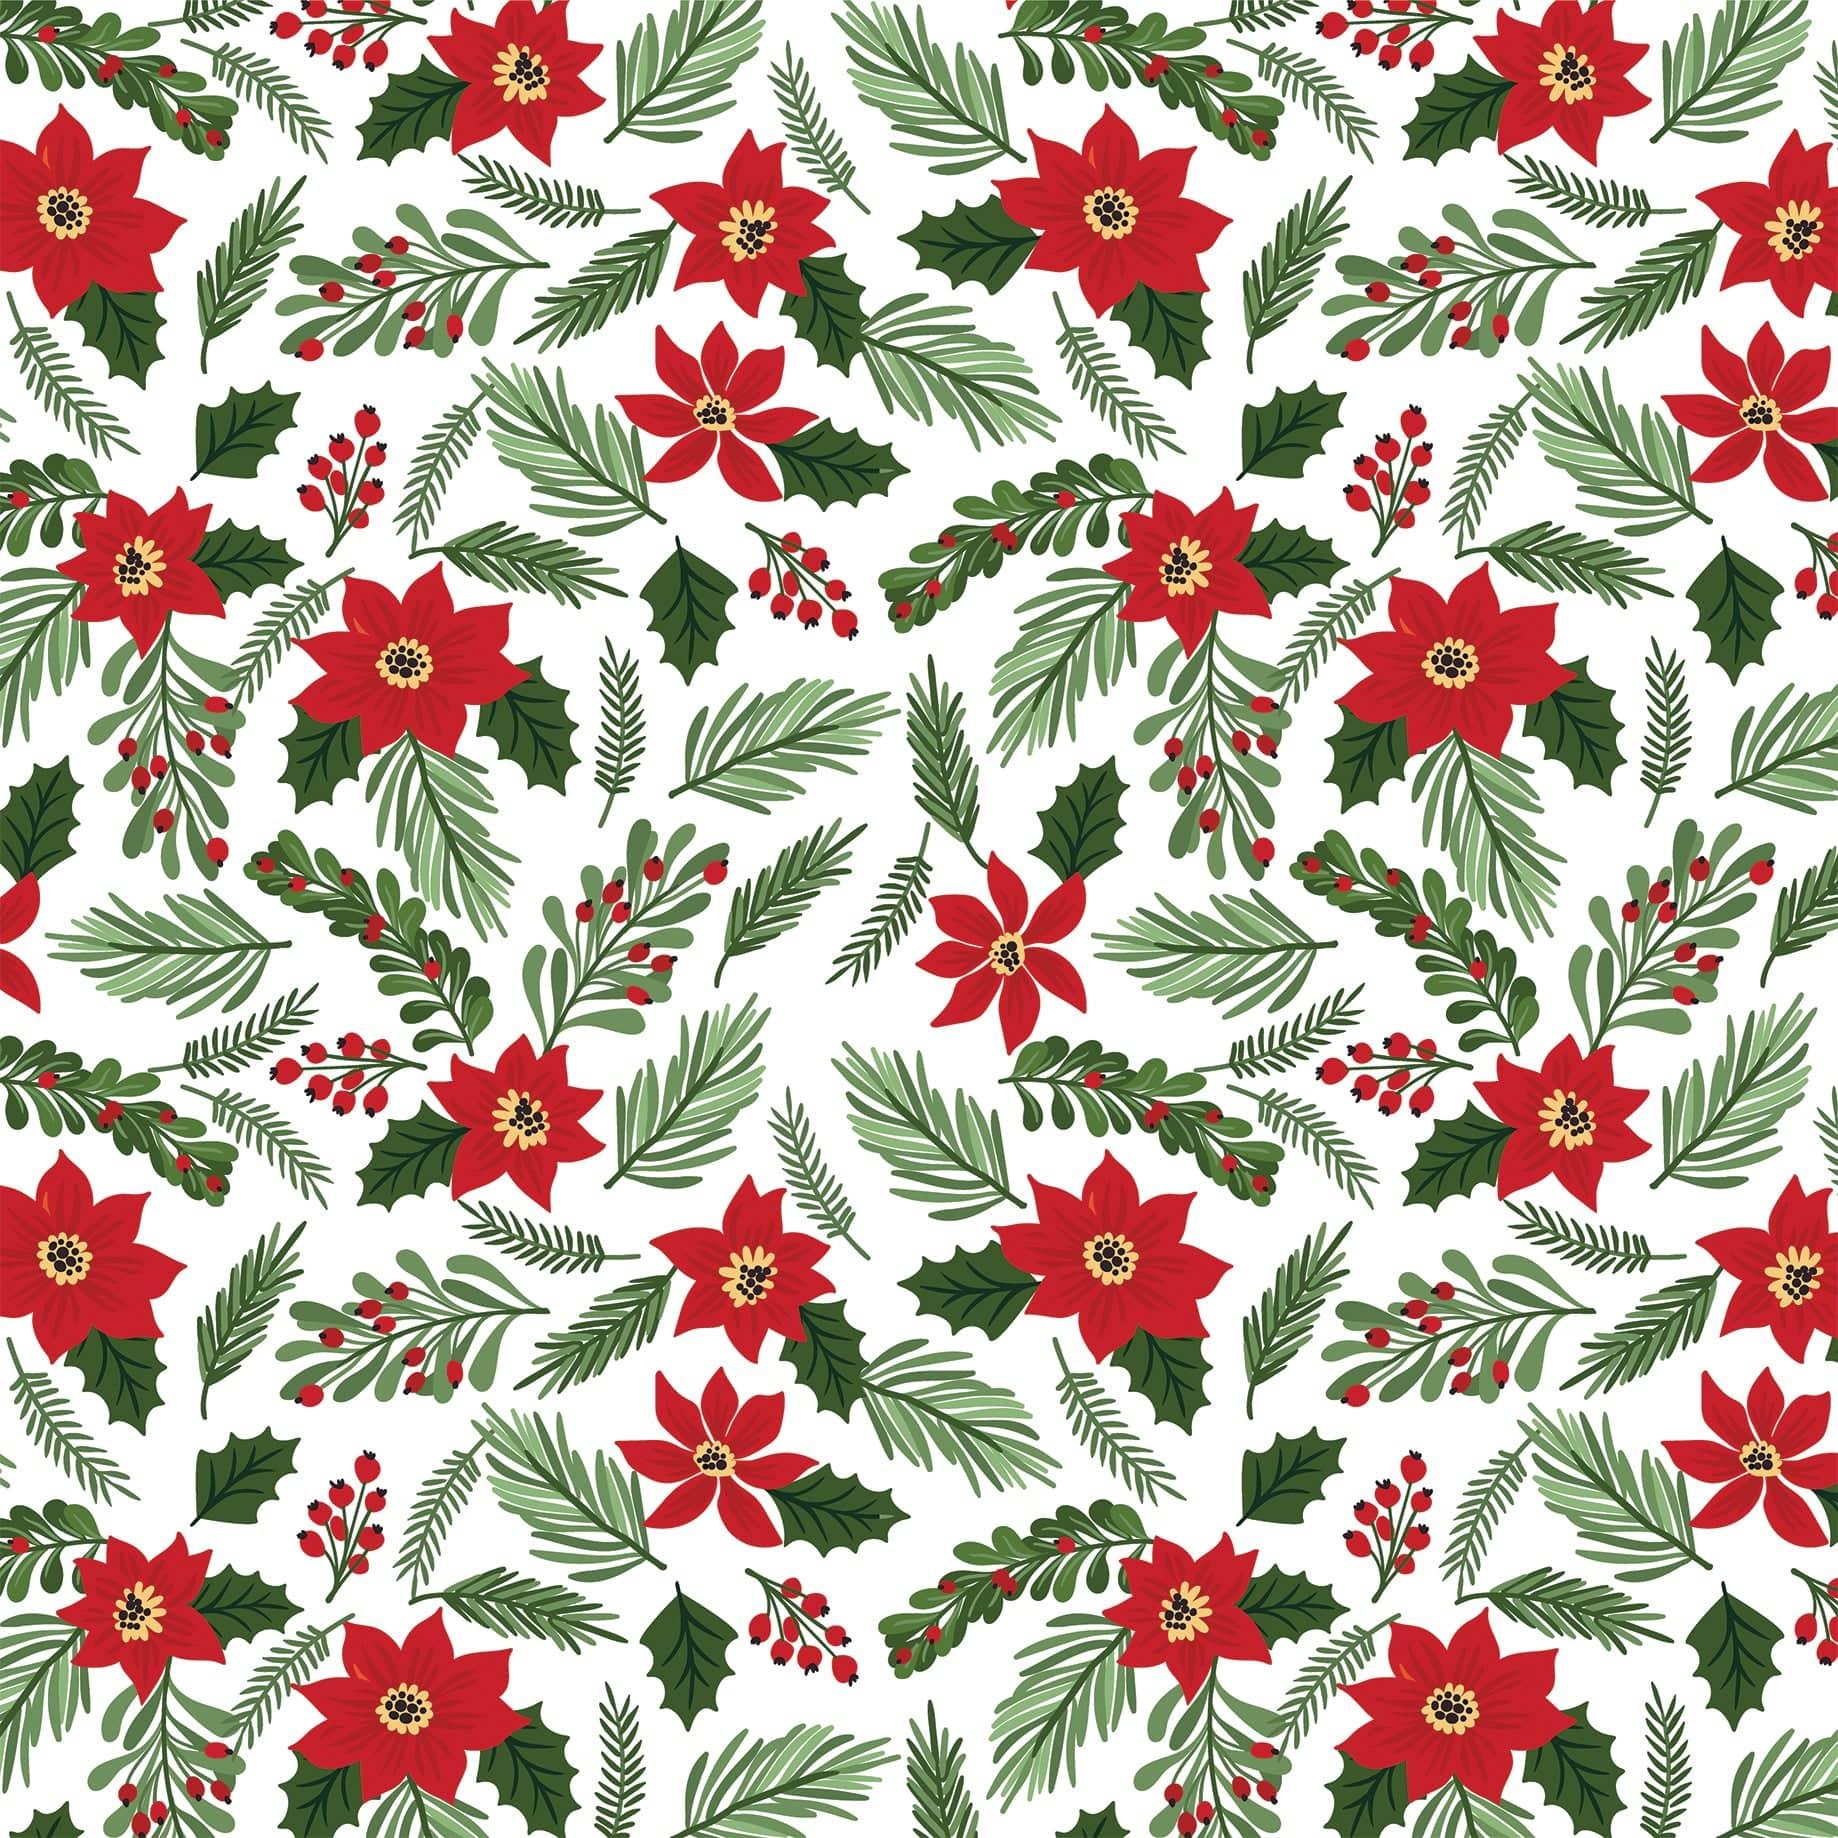 The Magic of Christmas Collection Poinsettias And Pine 12 x 12 Double-Sided Scrapbook Paper by Echo Park Paper - Scrapbook Supply Companies